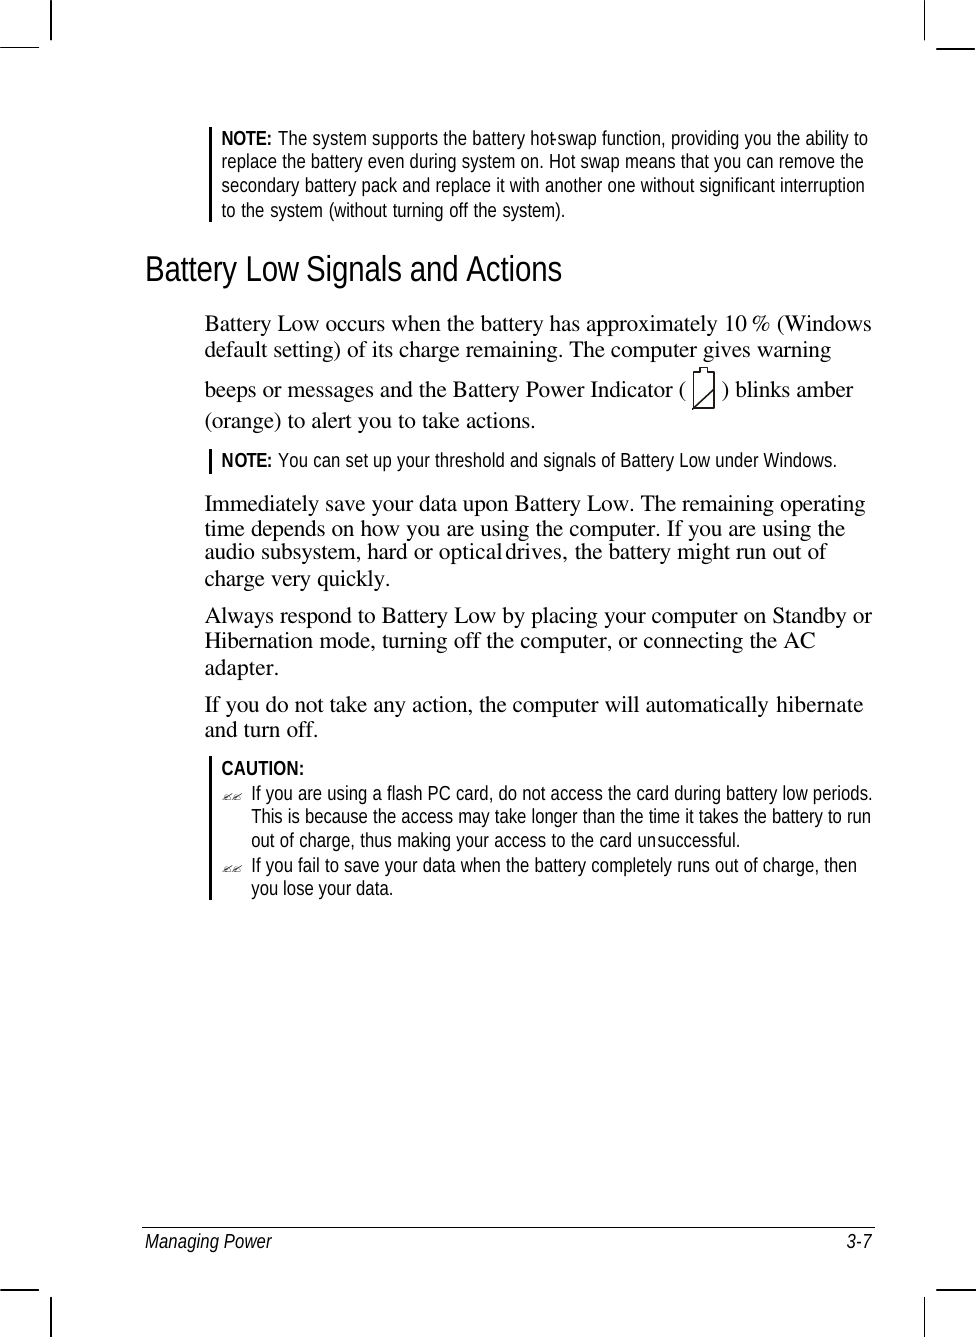  Managing Power 3-7 NOTE: The system supports the battery hot-swap function, providing you the ability to replace the battery even during system on. Hot swap means that you can remove the secondary battery pack and replace it with another one without significant interruption to the system (without turning off the system). Battery Low Signals and Actions Battery Low occurs when the battery has approximately 10 % (Windows default setting) of its charge remaining. The computer gives warning beeps or messages and the Battery Power Indicator (   ) blinks amber (orange) to alert you to take actions. NOTE: You can set up your threshold and signals of Battery Low under Windows.  Immediately save your data upon Battery Low. The remaining operating time depends on how you are using the computer. If you are using the audio subsystem, hard or optical drives, the battery might run out of charge very quickly. Always respond to Battery Low by placing your computer on Standby or Hibernation mode, turning off the computer, or connecting the AC adapter. If you do not take any action, the computer will automatically hibernate and turn off. CAUTION: ?? If you are using a flash PC card, do not access the card during battery low periods. This is because the access may take longer than the time it takes the battery to run out of charge, thus making your access to the card unsuccessful. ?? If you fail to save your data when the battery completely runs out of charge, then you lose your data.  